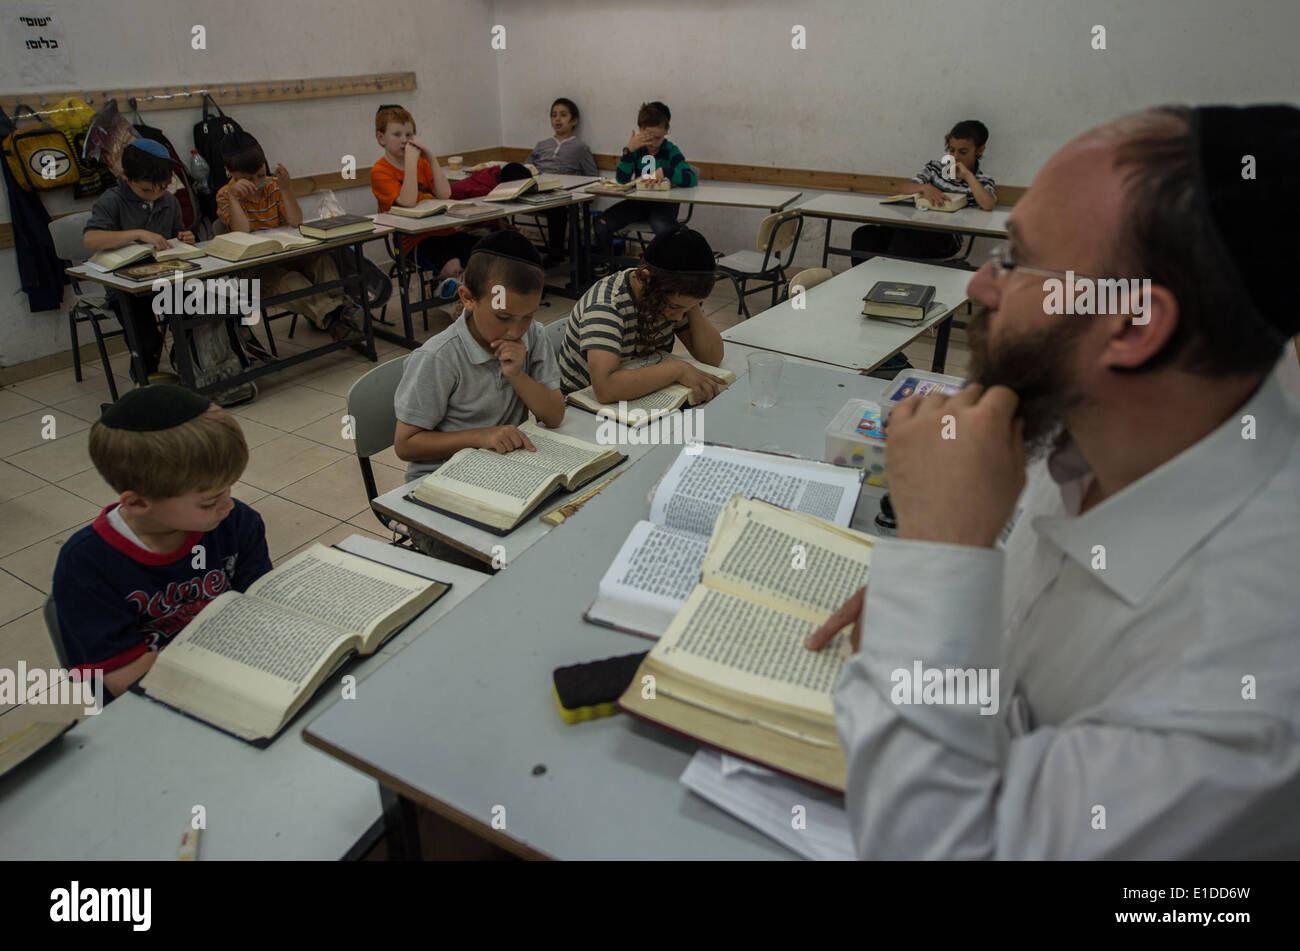 (140601) -- JERUSALEM, June 1, 2014 (Xinhua) -- Orthodox Jewish pupils take a class of Jewish religion at Torat Moshe elementary school in Beit Shemesh, about 20 km from Jerusalem, on May 29, 2014. Tzviel Noyman is an Israeli Ultra-Orthodox boy in a family with six children, three boys and three girls. He is ten years old this year and a grade three pupil of Torat Moshe elementary school, which is only opened to Jewish children. Tzviel has eight classes each day, including Hebrew, English, mathematics and Jewish religion, which has four classes each day including Talmud, Mishnah and Gemara. Tz Stock Photo